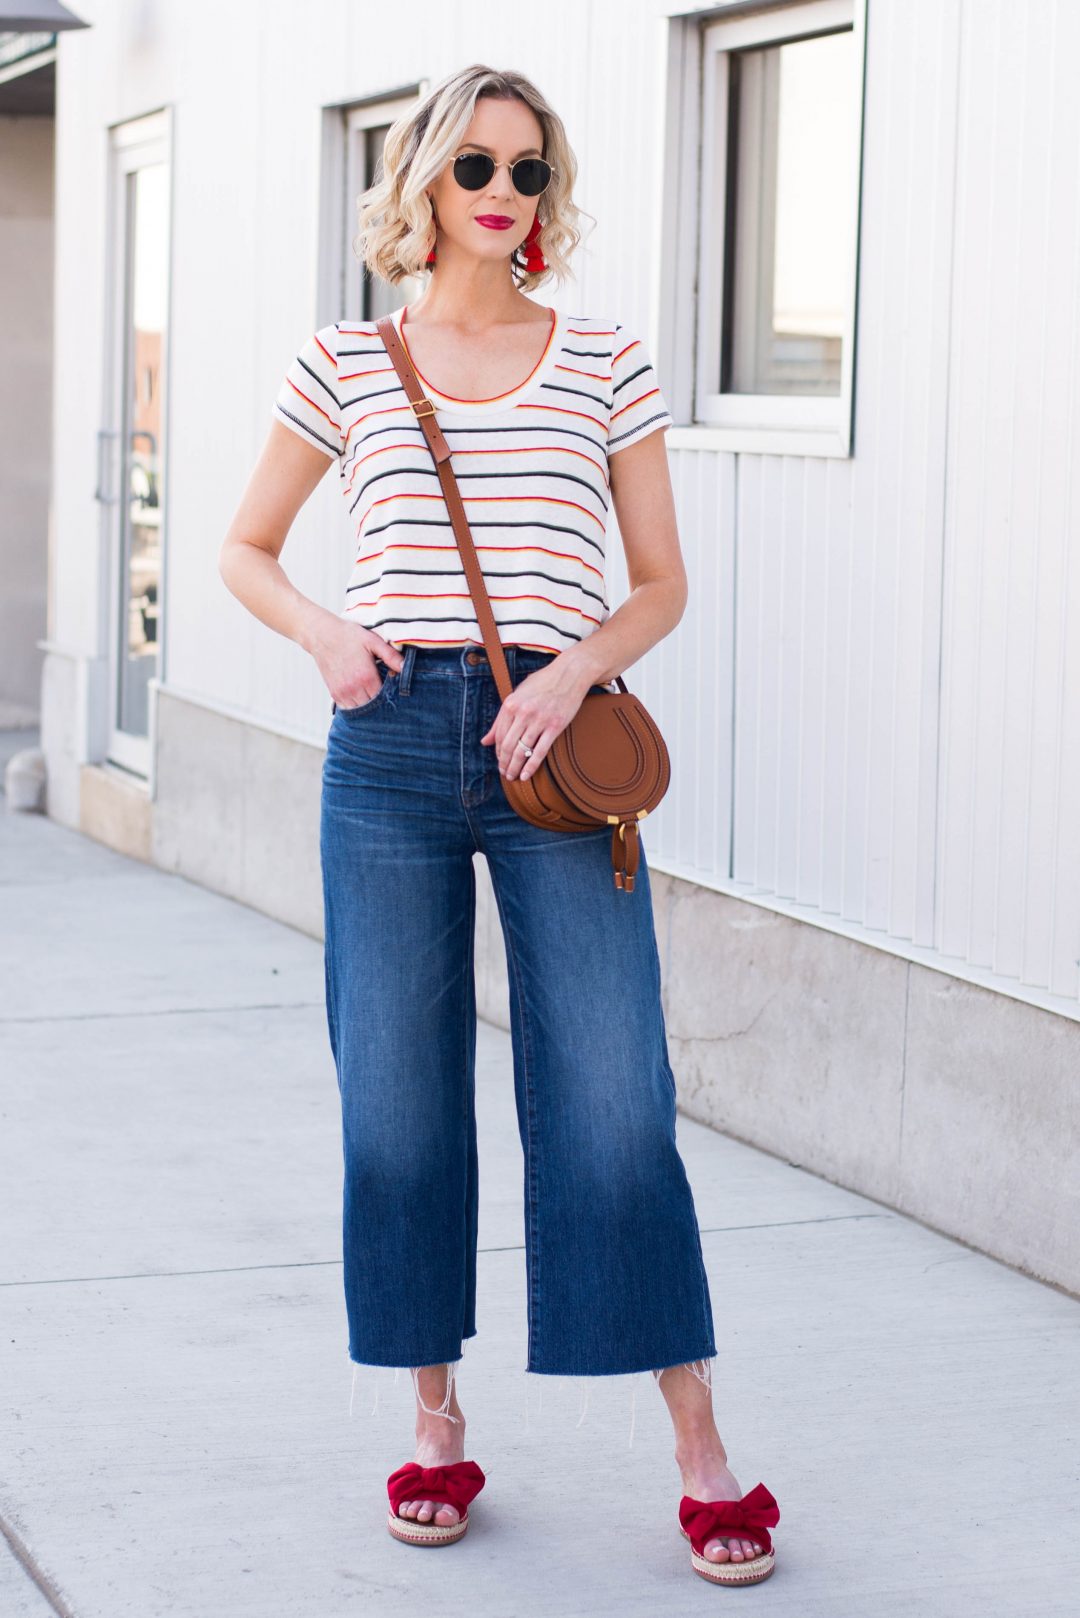 How to Make Your T-Shirt and Jeans More Fun - Straight A Style